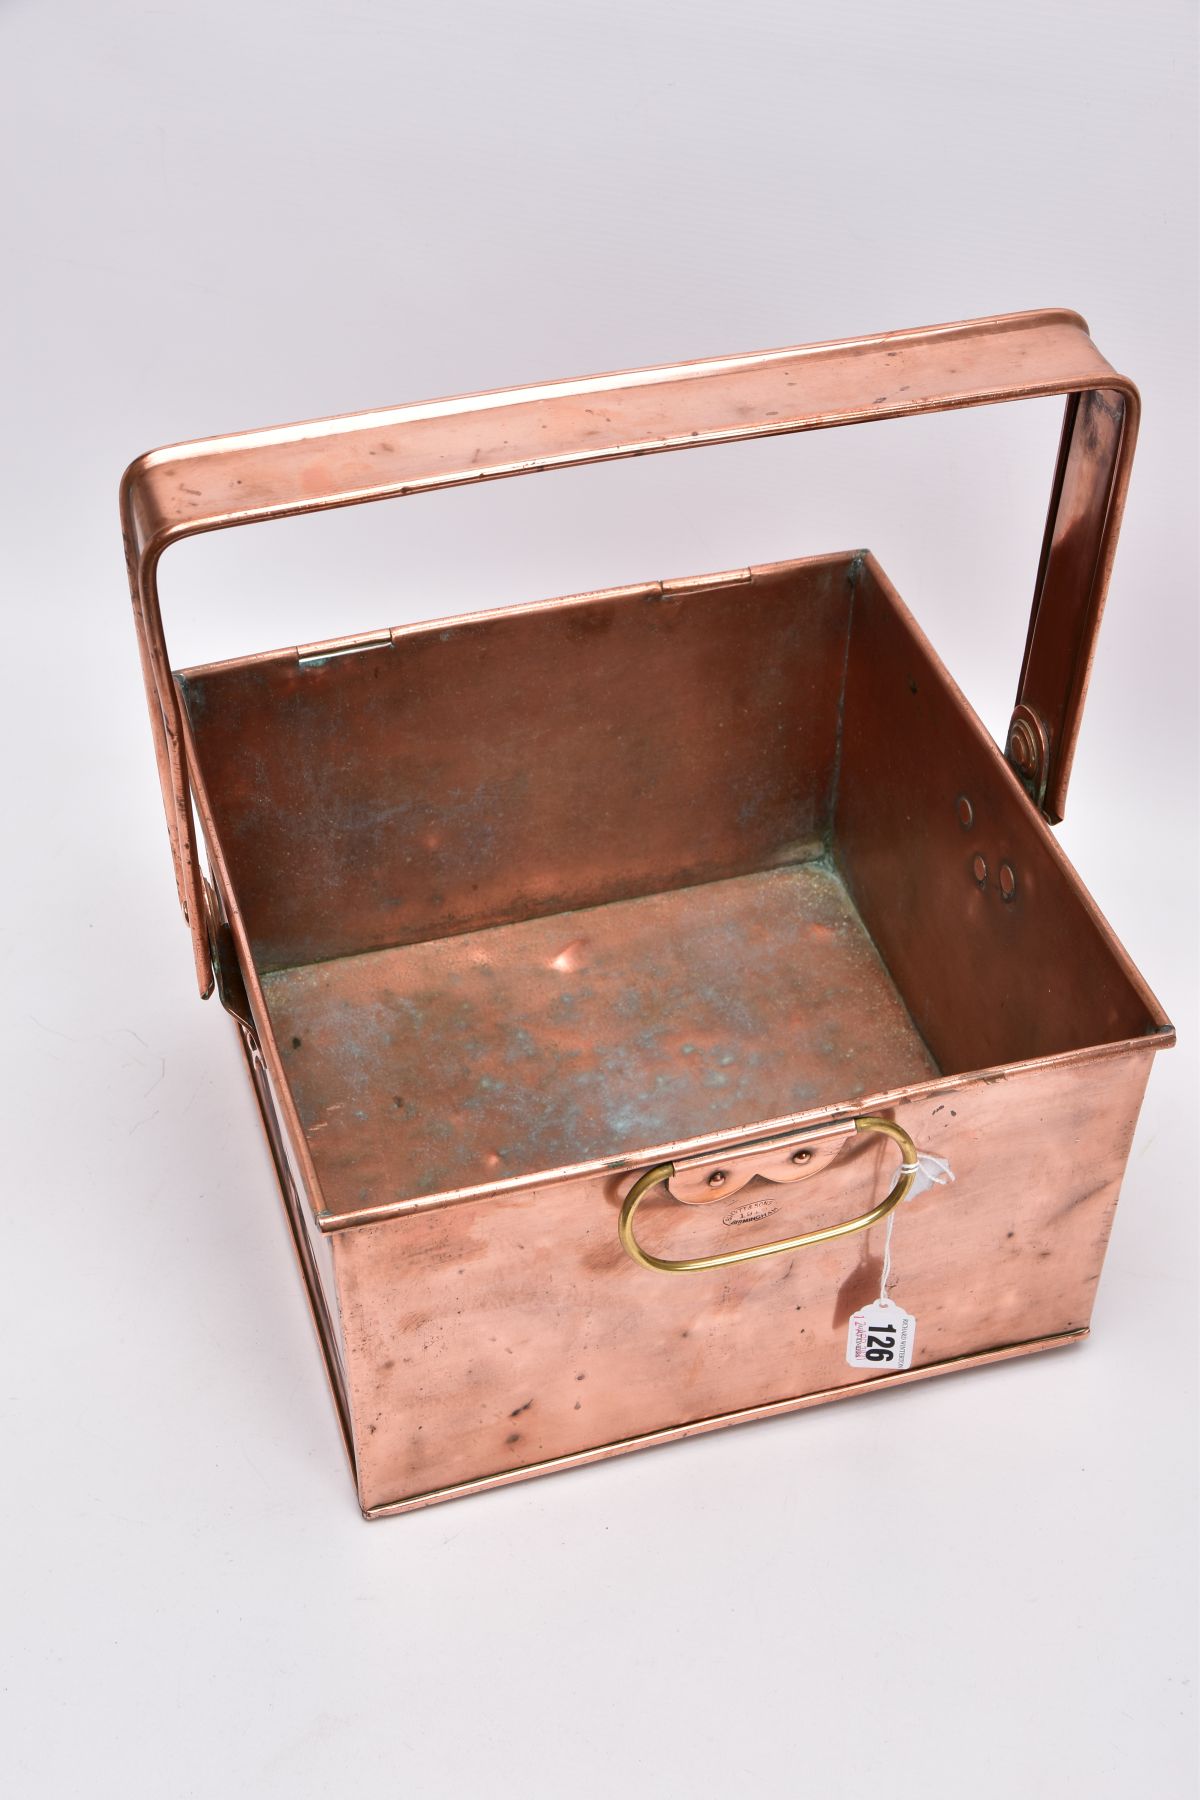 A BULPITT & SONS COPPER SWING HANDLED STORAGE BOX, date stamped 1915, missing cover, approximate - Image 4 of 6